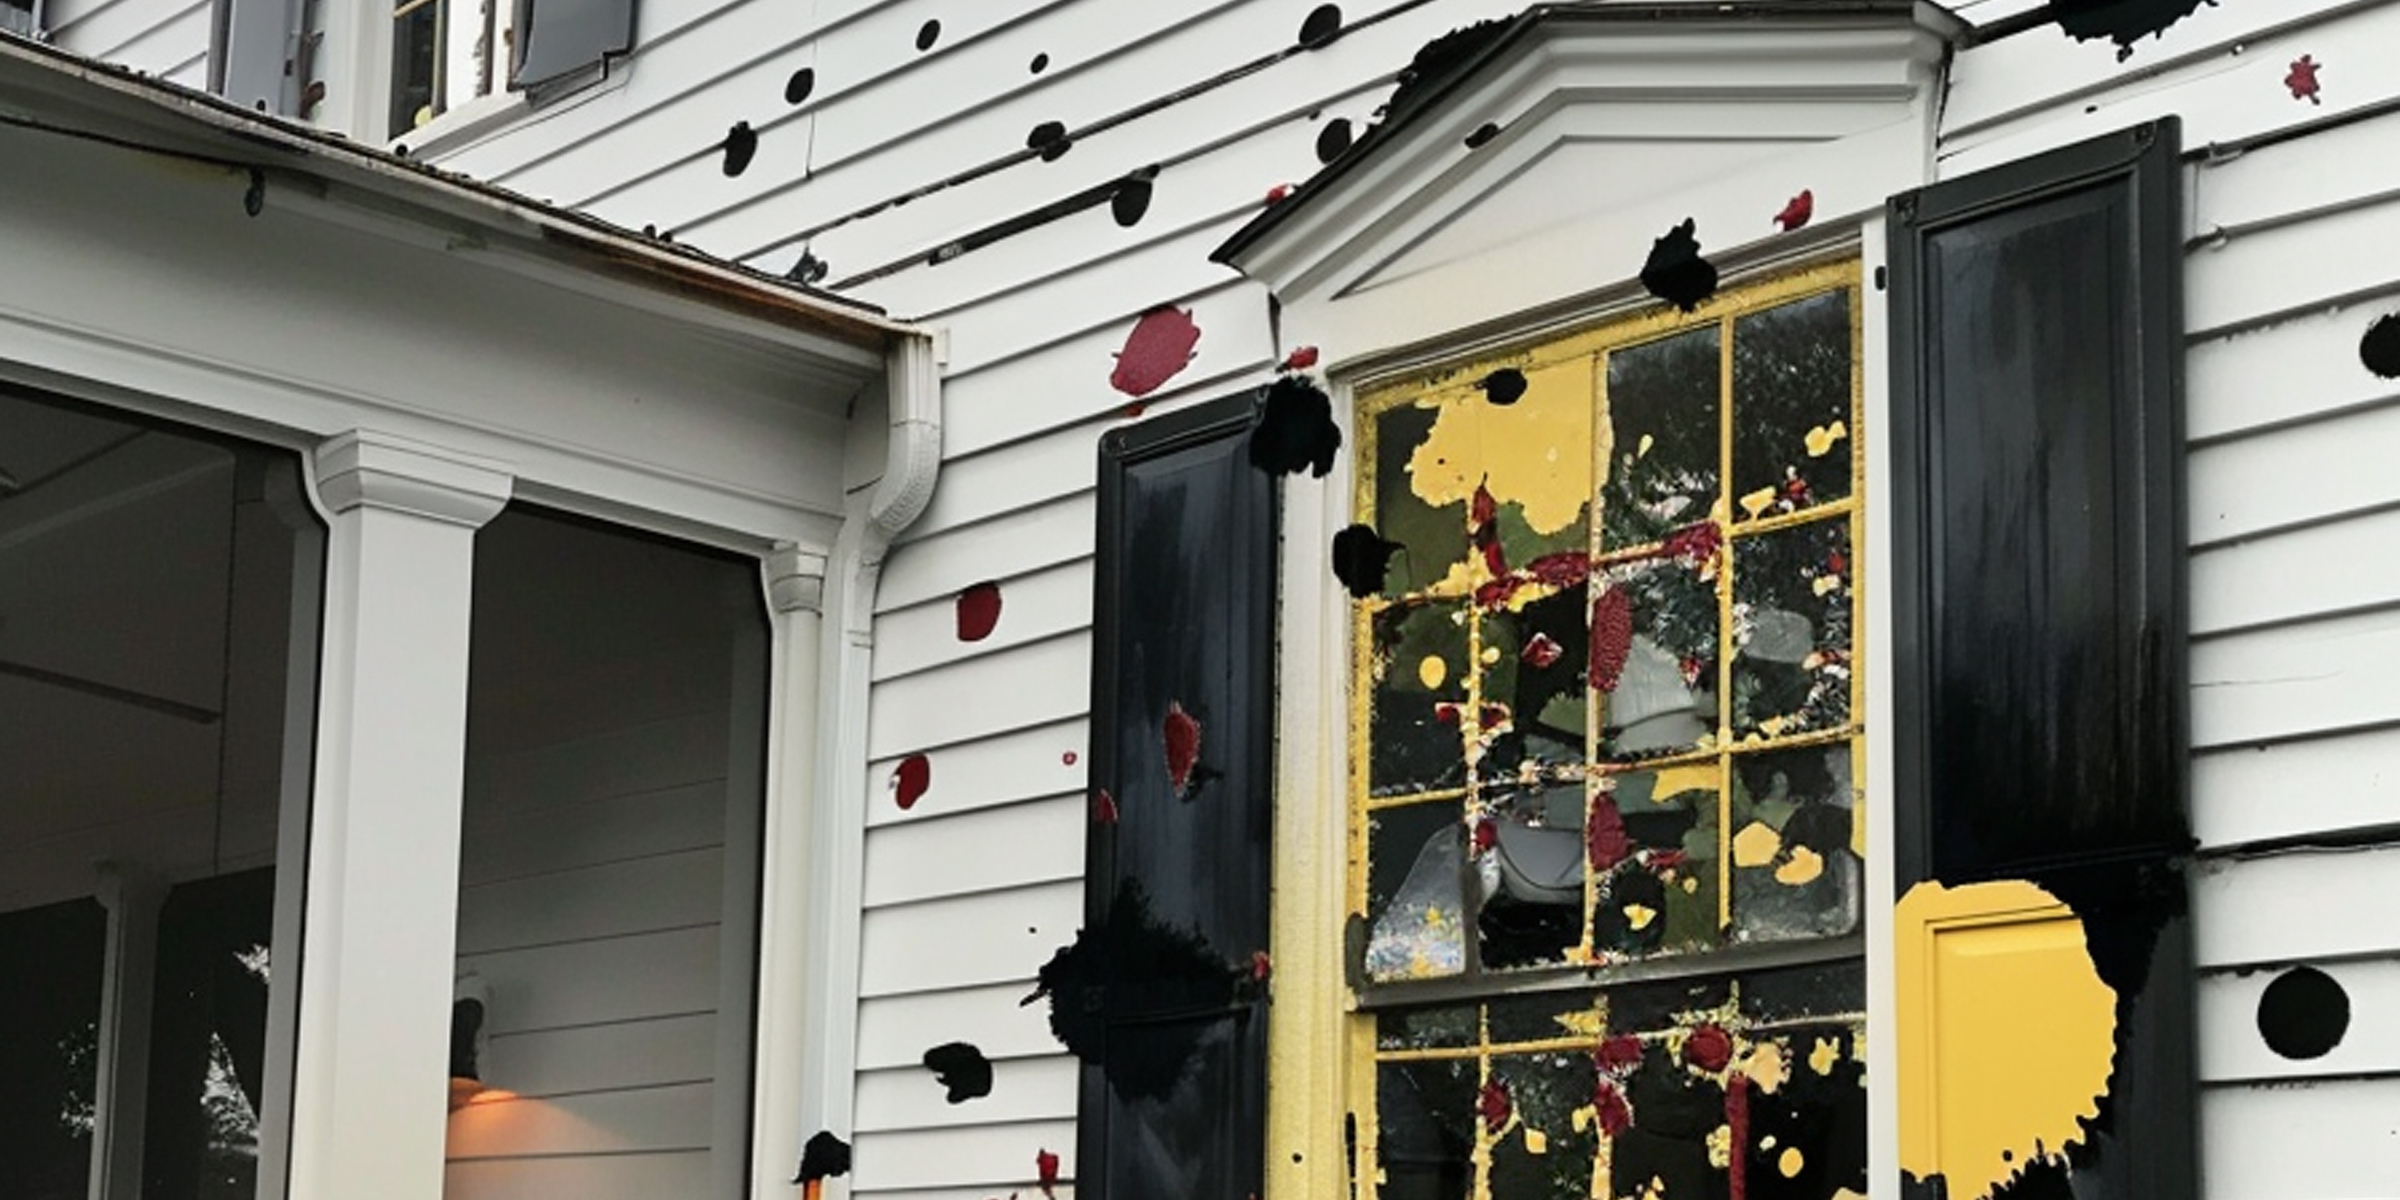 Paint splattered on the windows of a house | Source: AmoMama